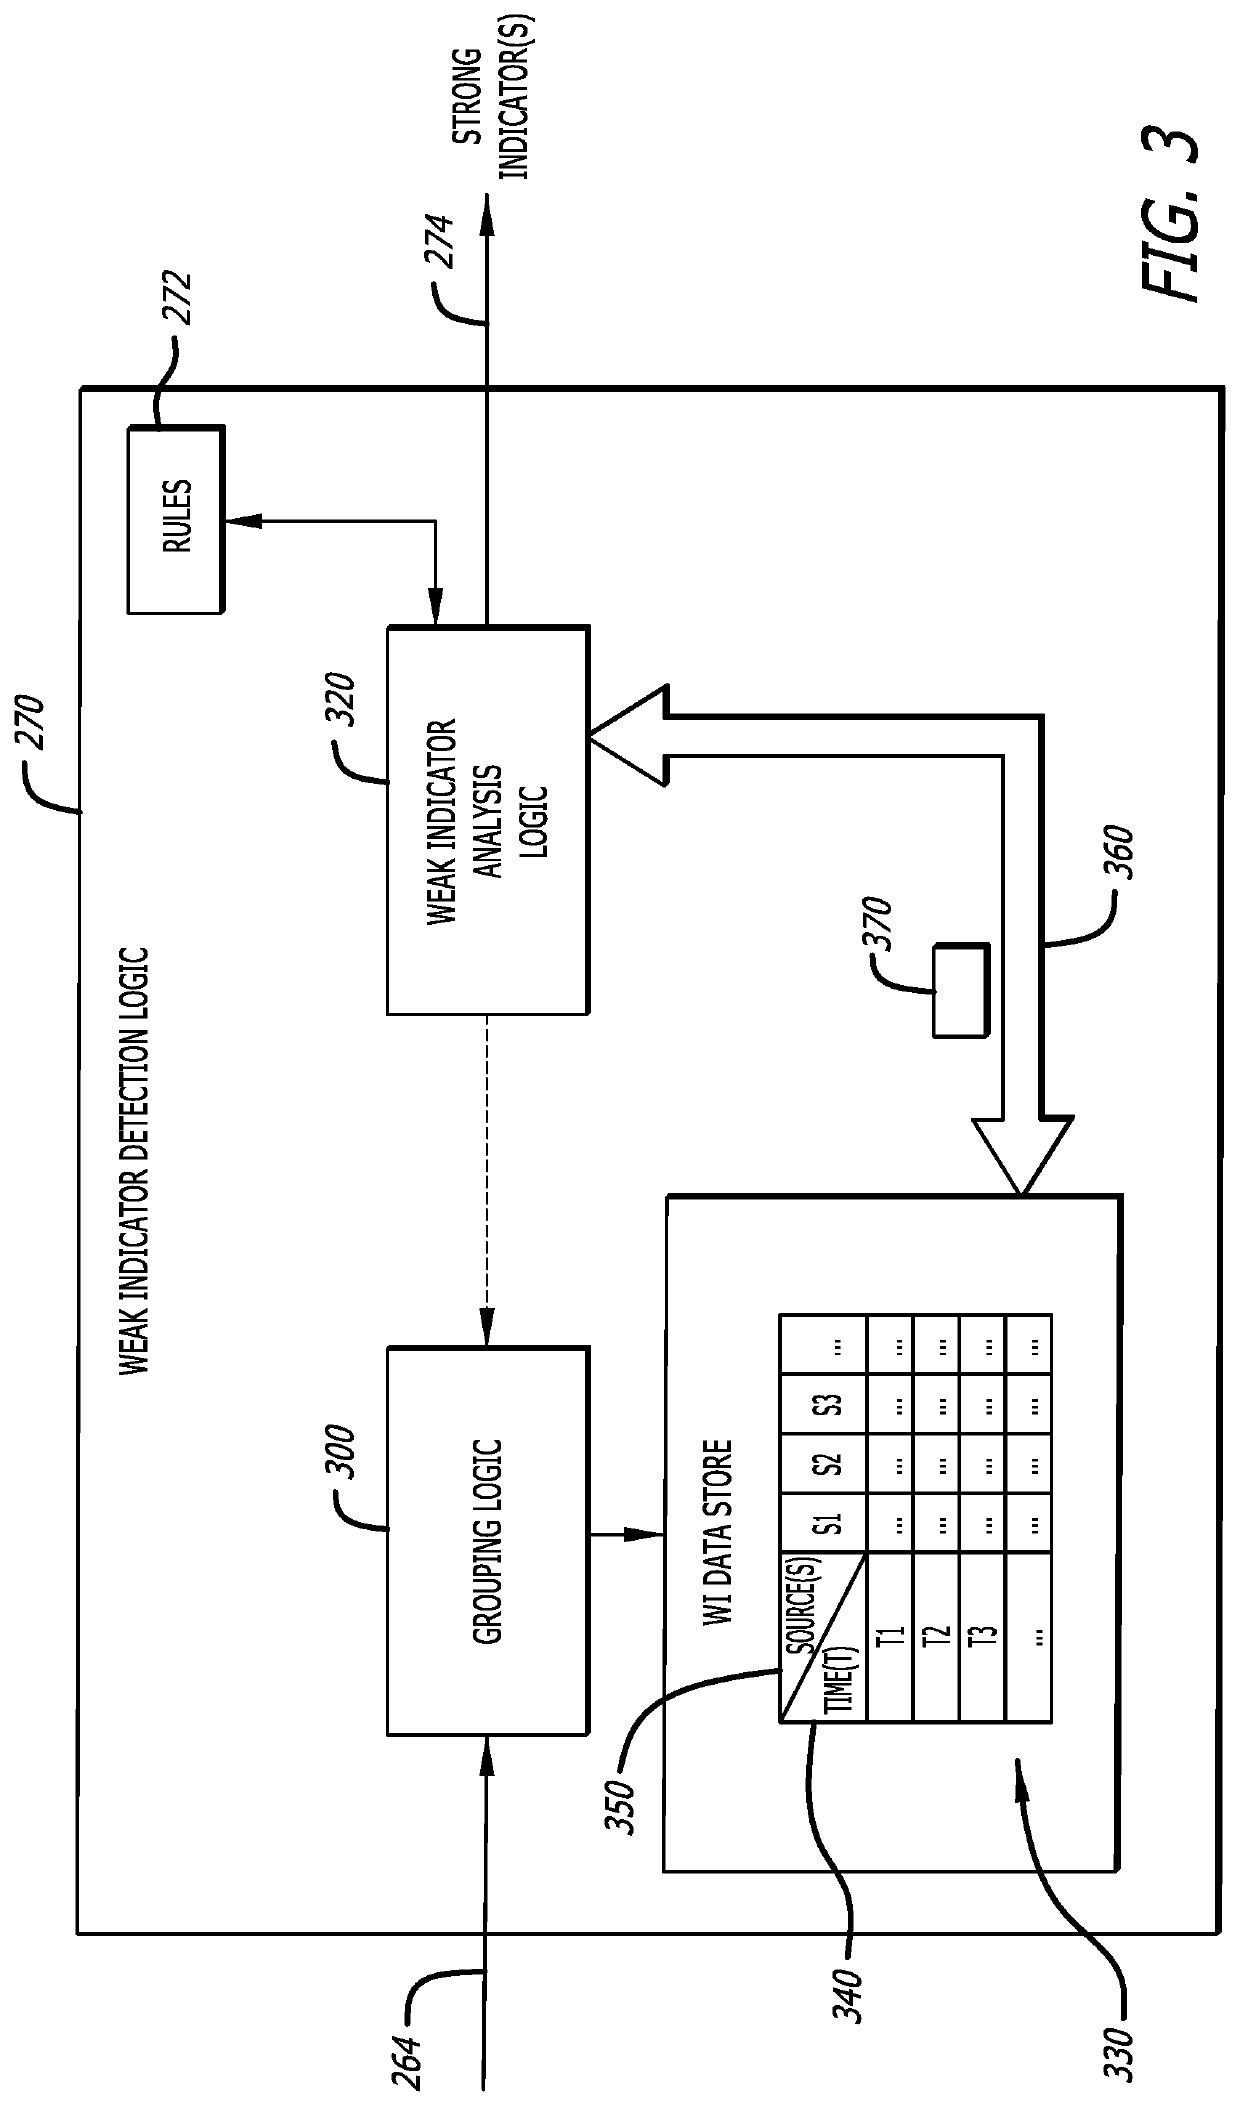 Cyber-security system and method for weak indicator detection and correlation to generate strong indicators